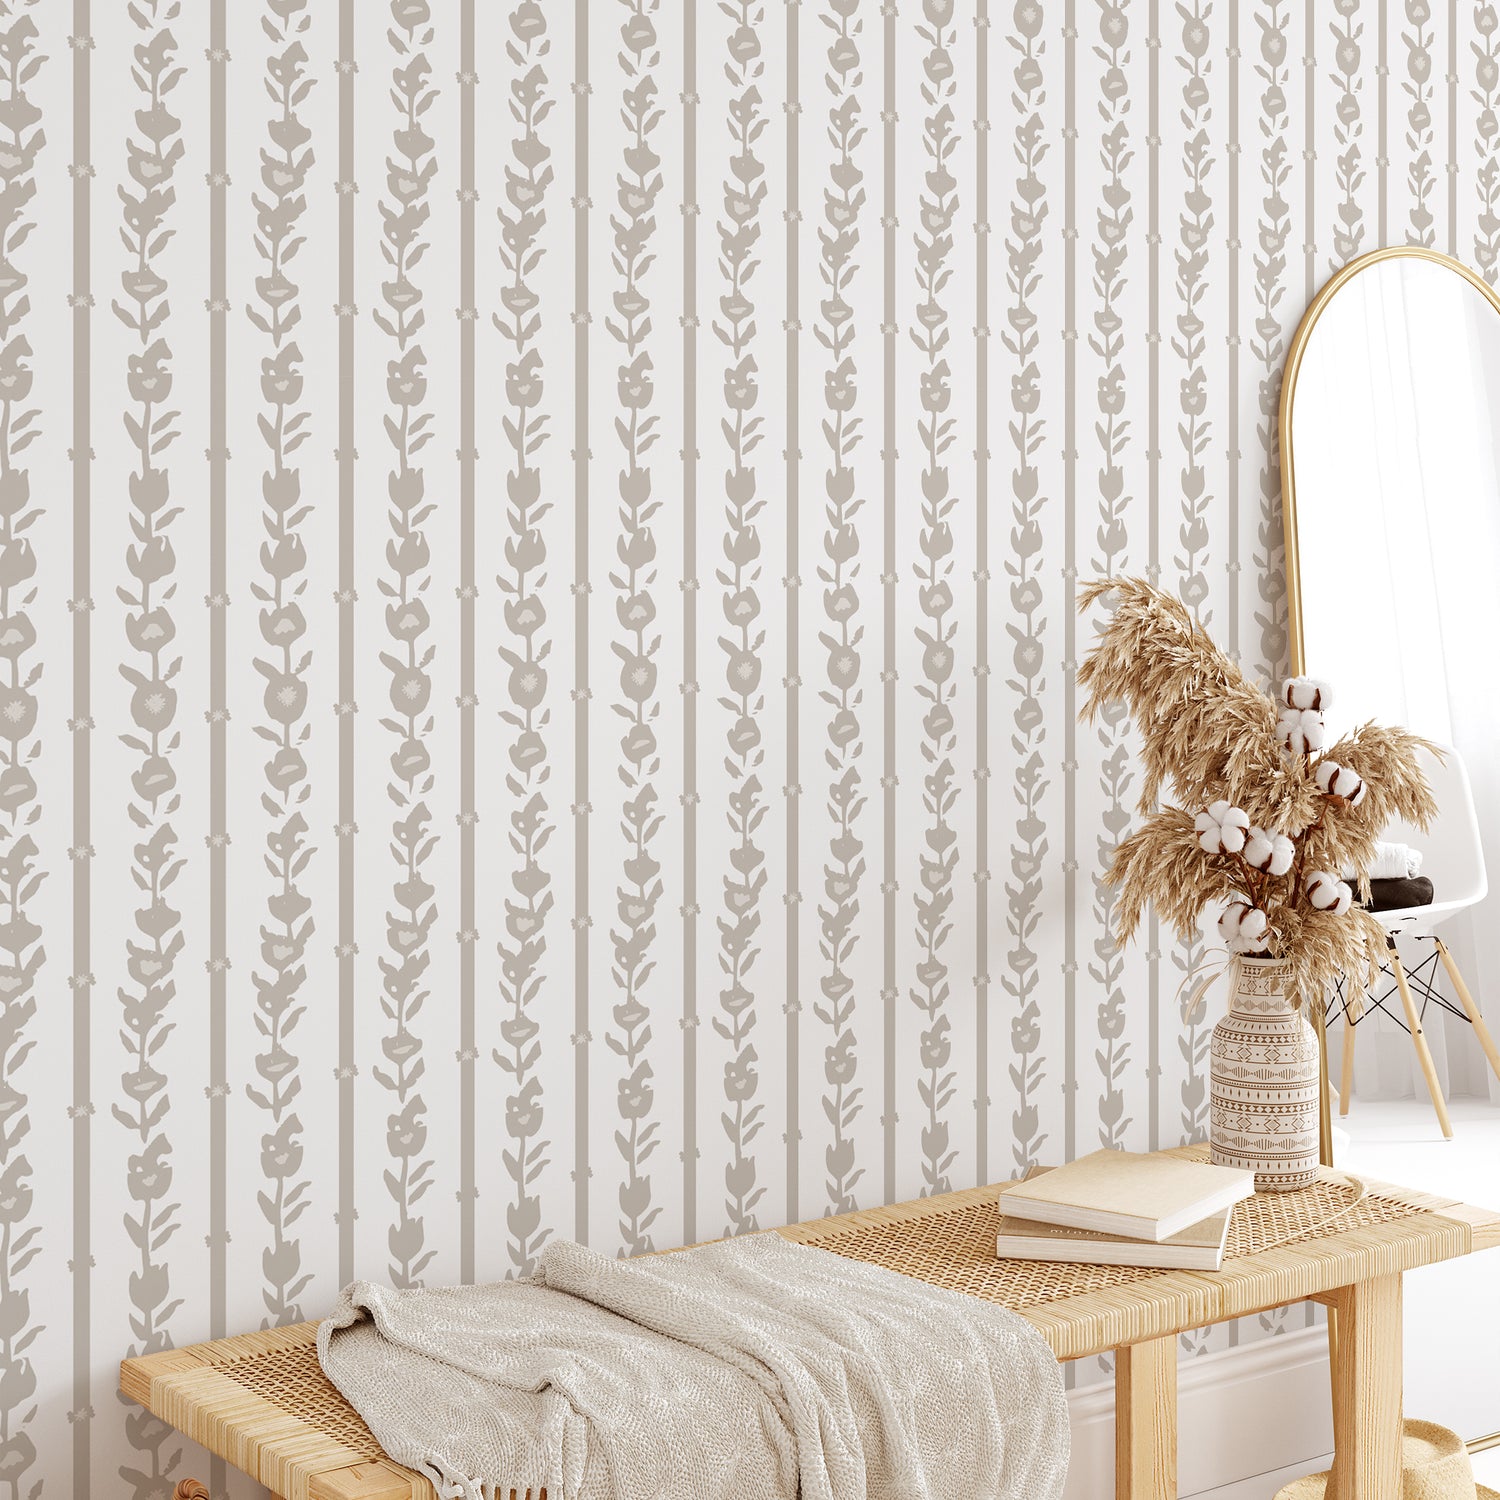 Bedroom wall featuring our oversized floral and stripe Esme peel and stick wallpaper in sand, tan, white by Jackie O'Bosky.